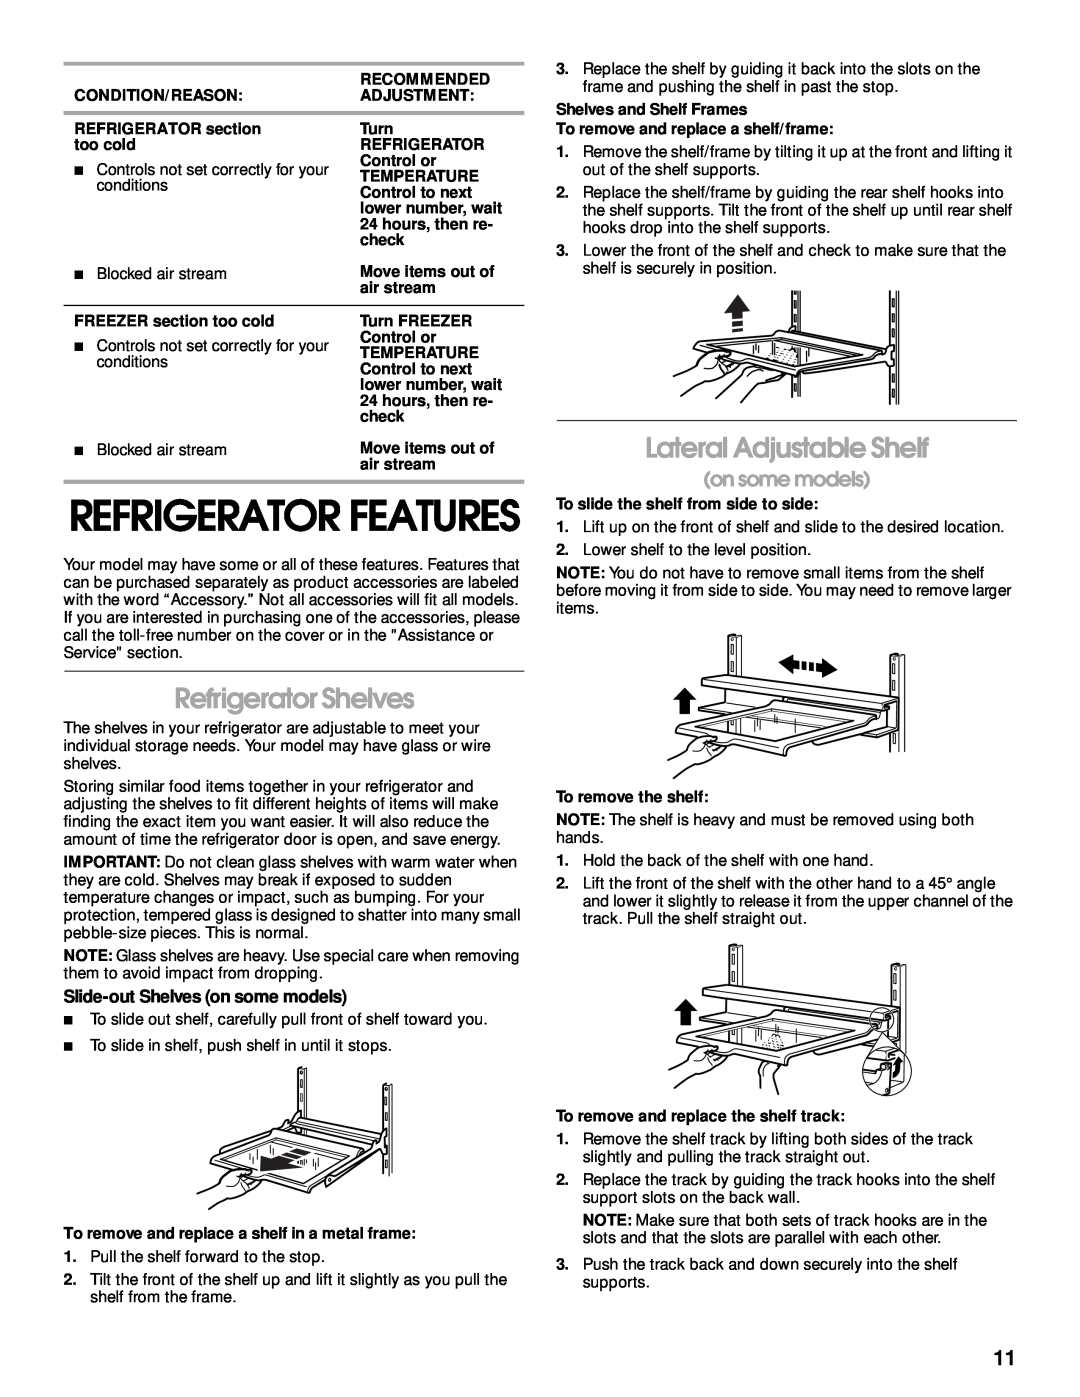 Whirlpool ST21PKXJW00 Refrigerator Shelves, Lateral Adjustable Shelf, on some models, Refrigerator Features, Recommended 